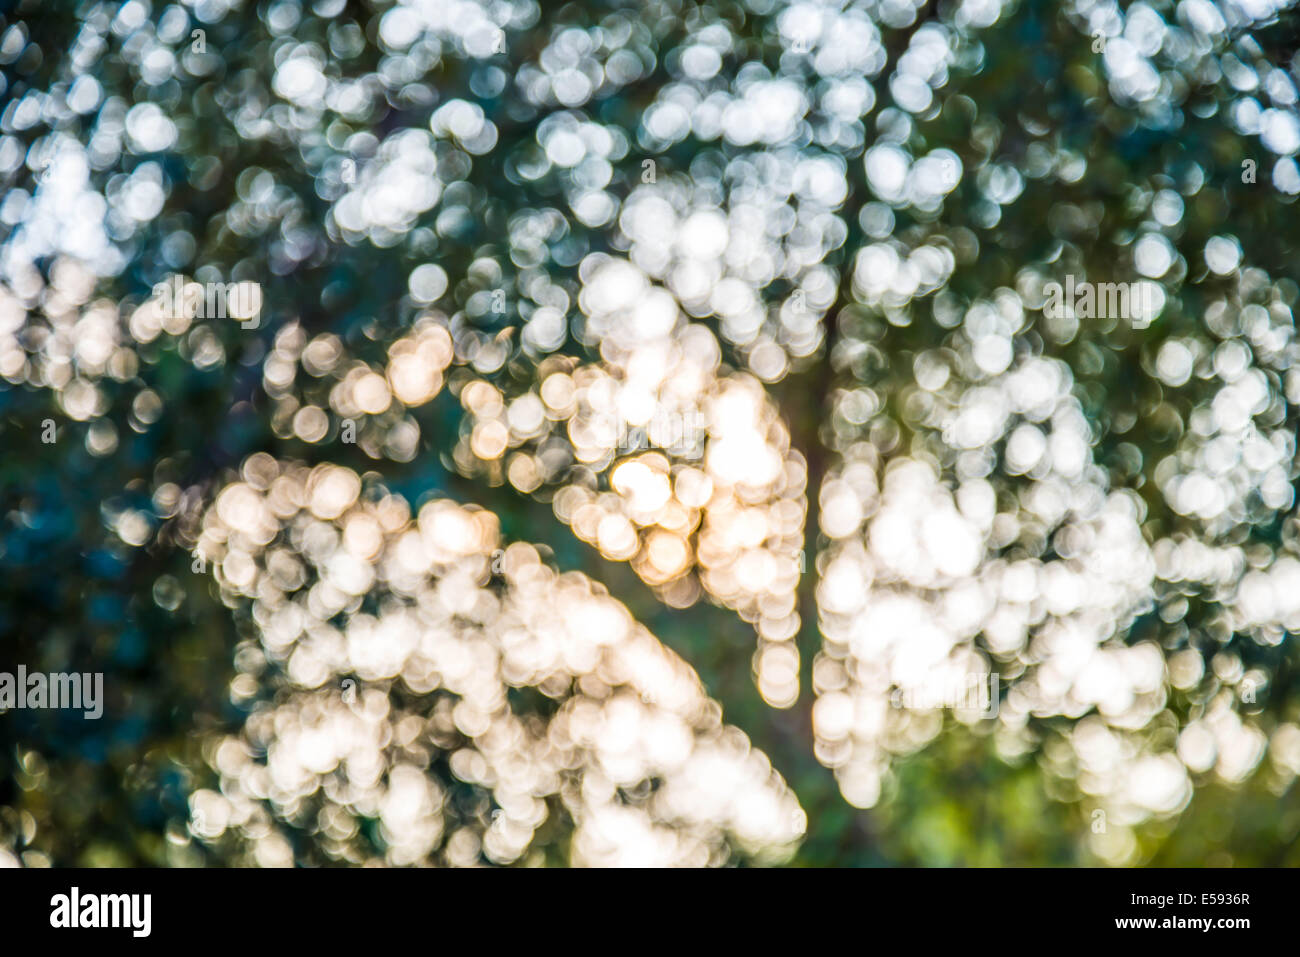 Zoom Shot Out Of Focus Green Tree For Background Stock Photo Alamy